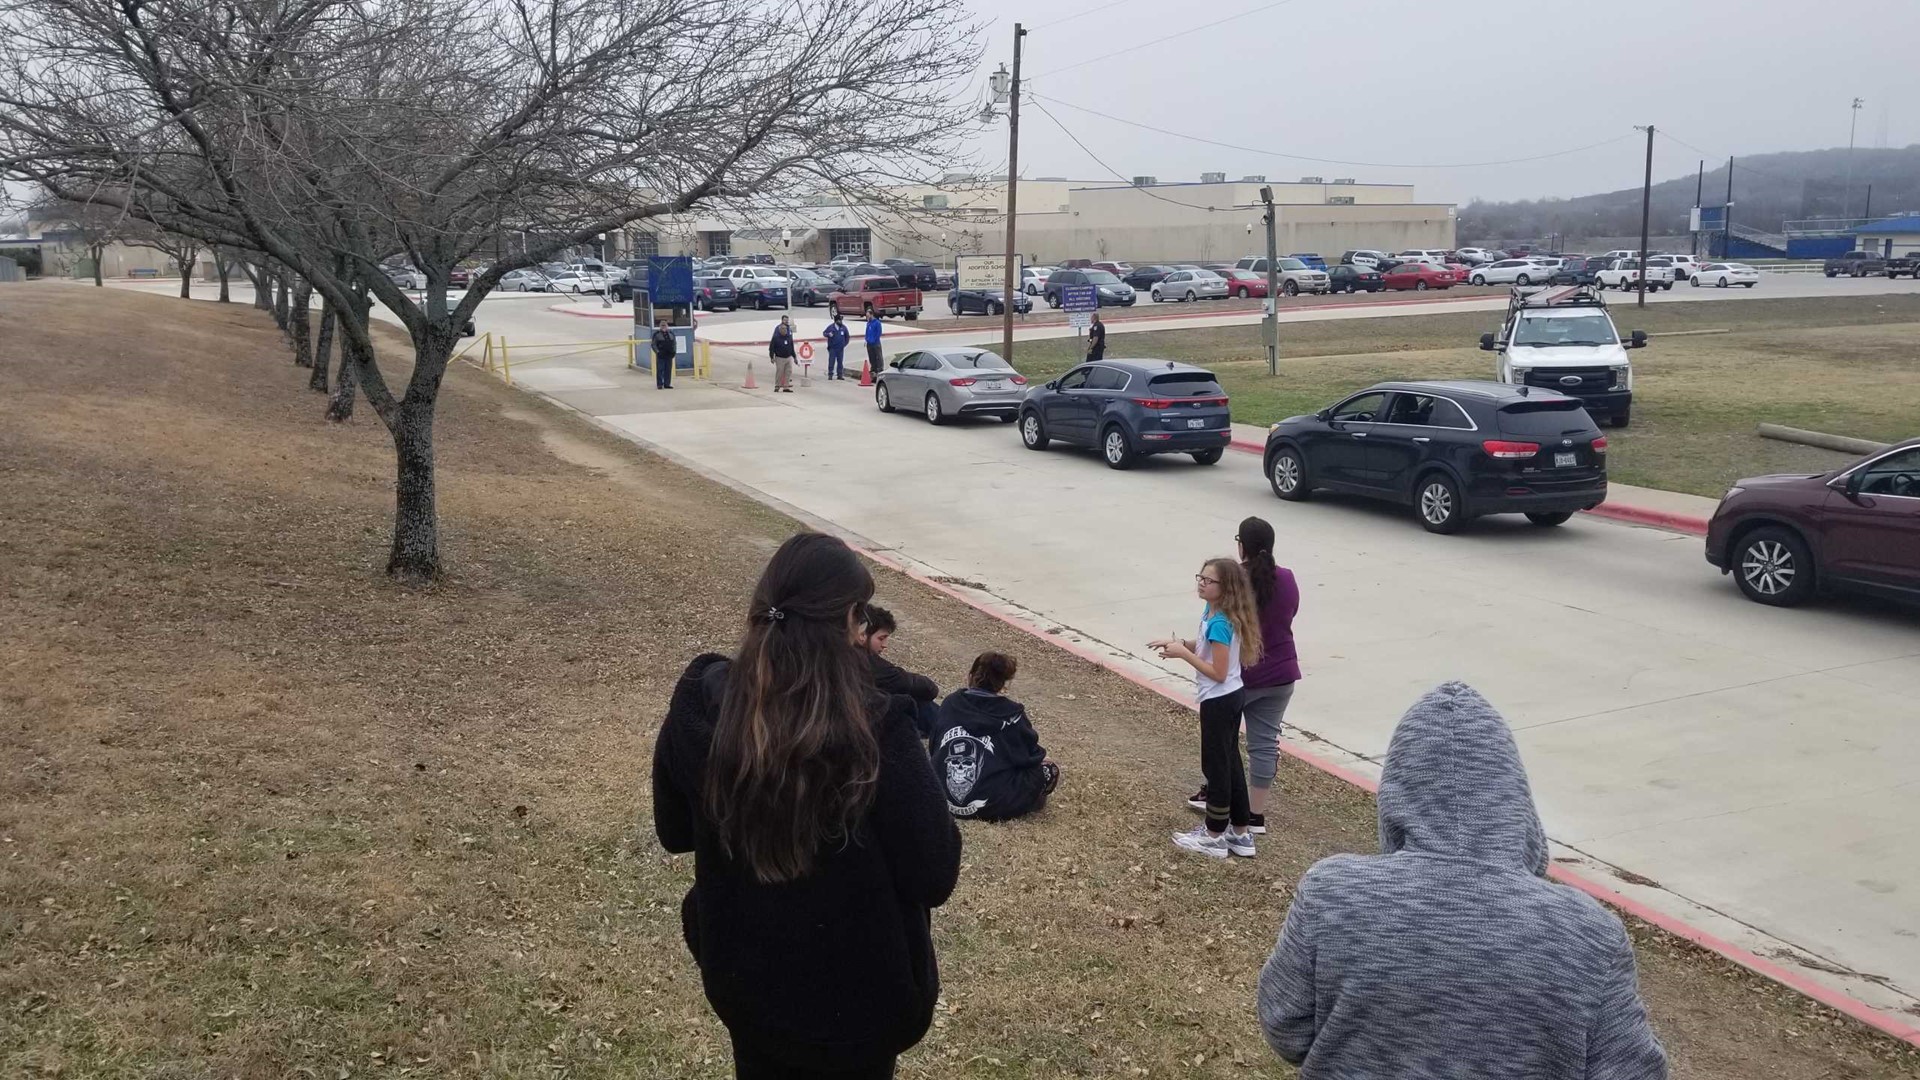 Copperas Cove High School was placed on lockdown Monday for about an hour. Despite rumors, there was no threat to students.